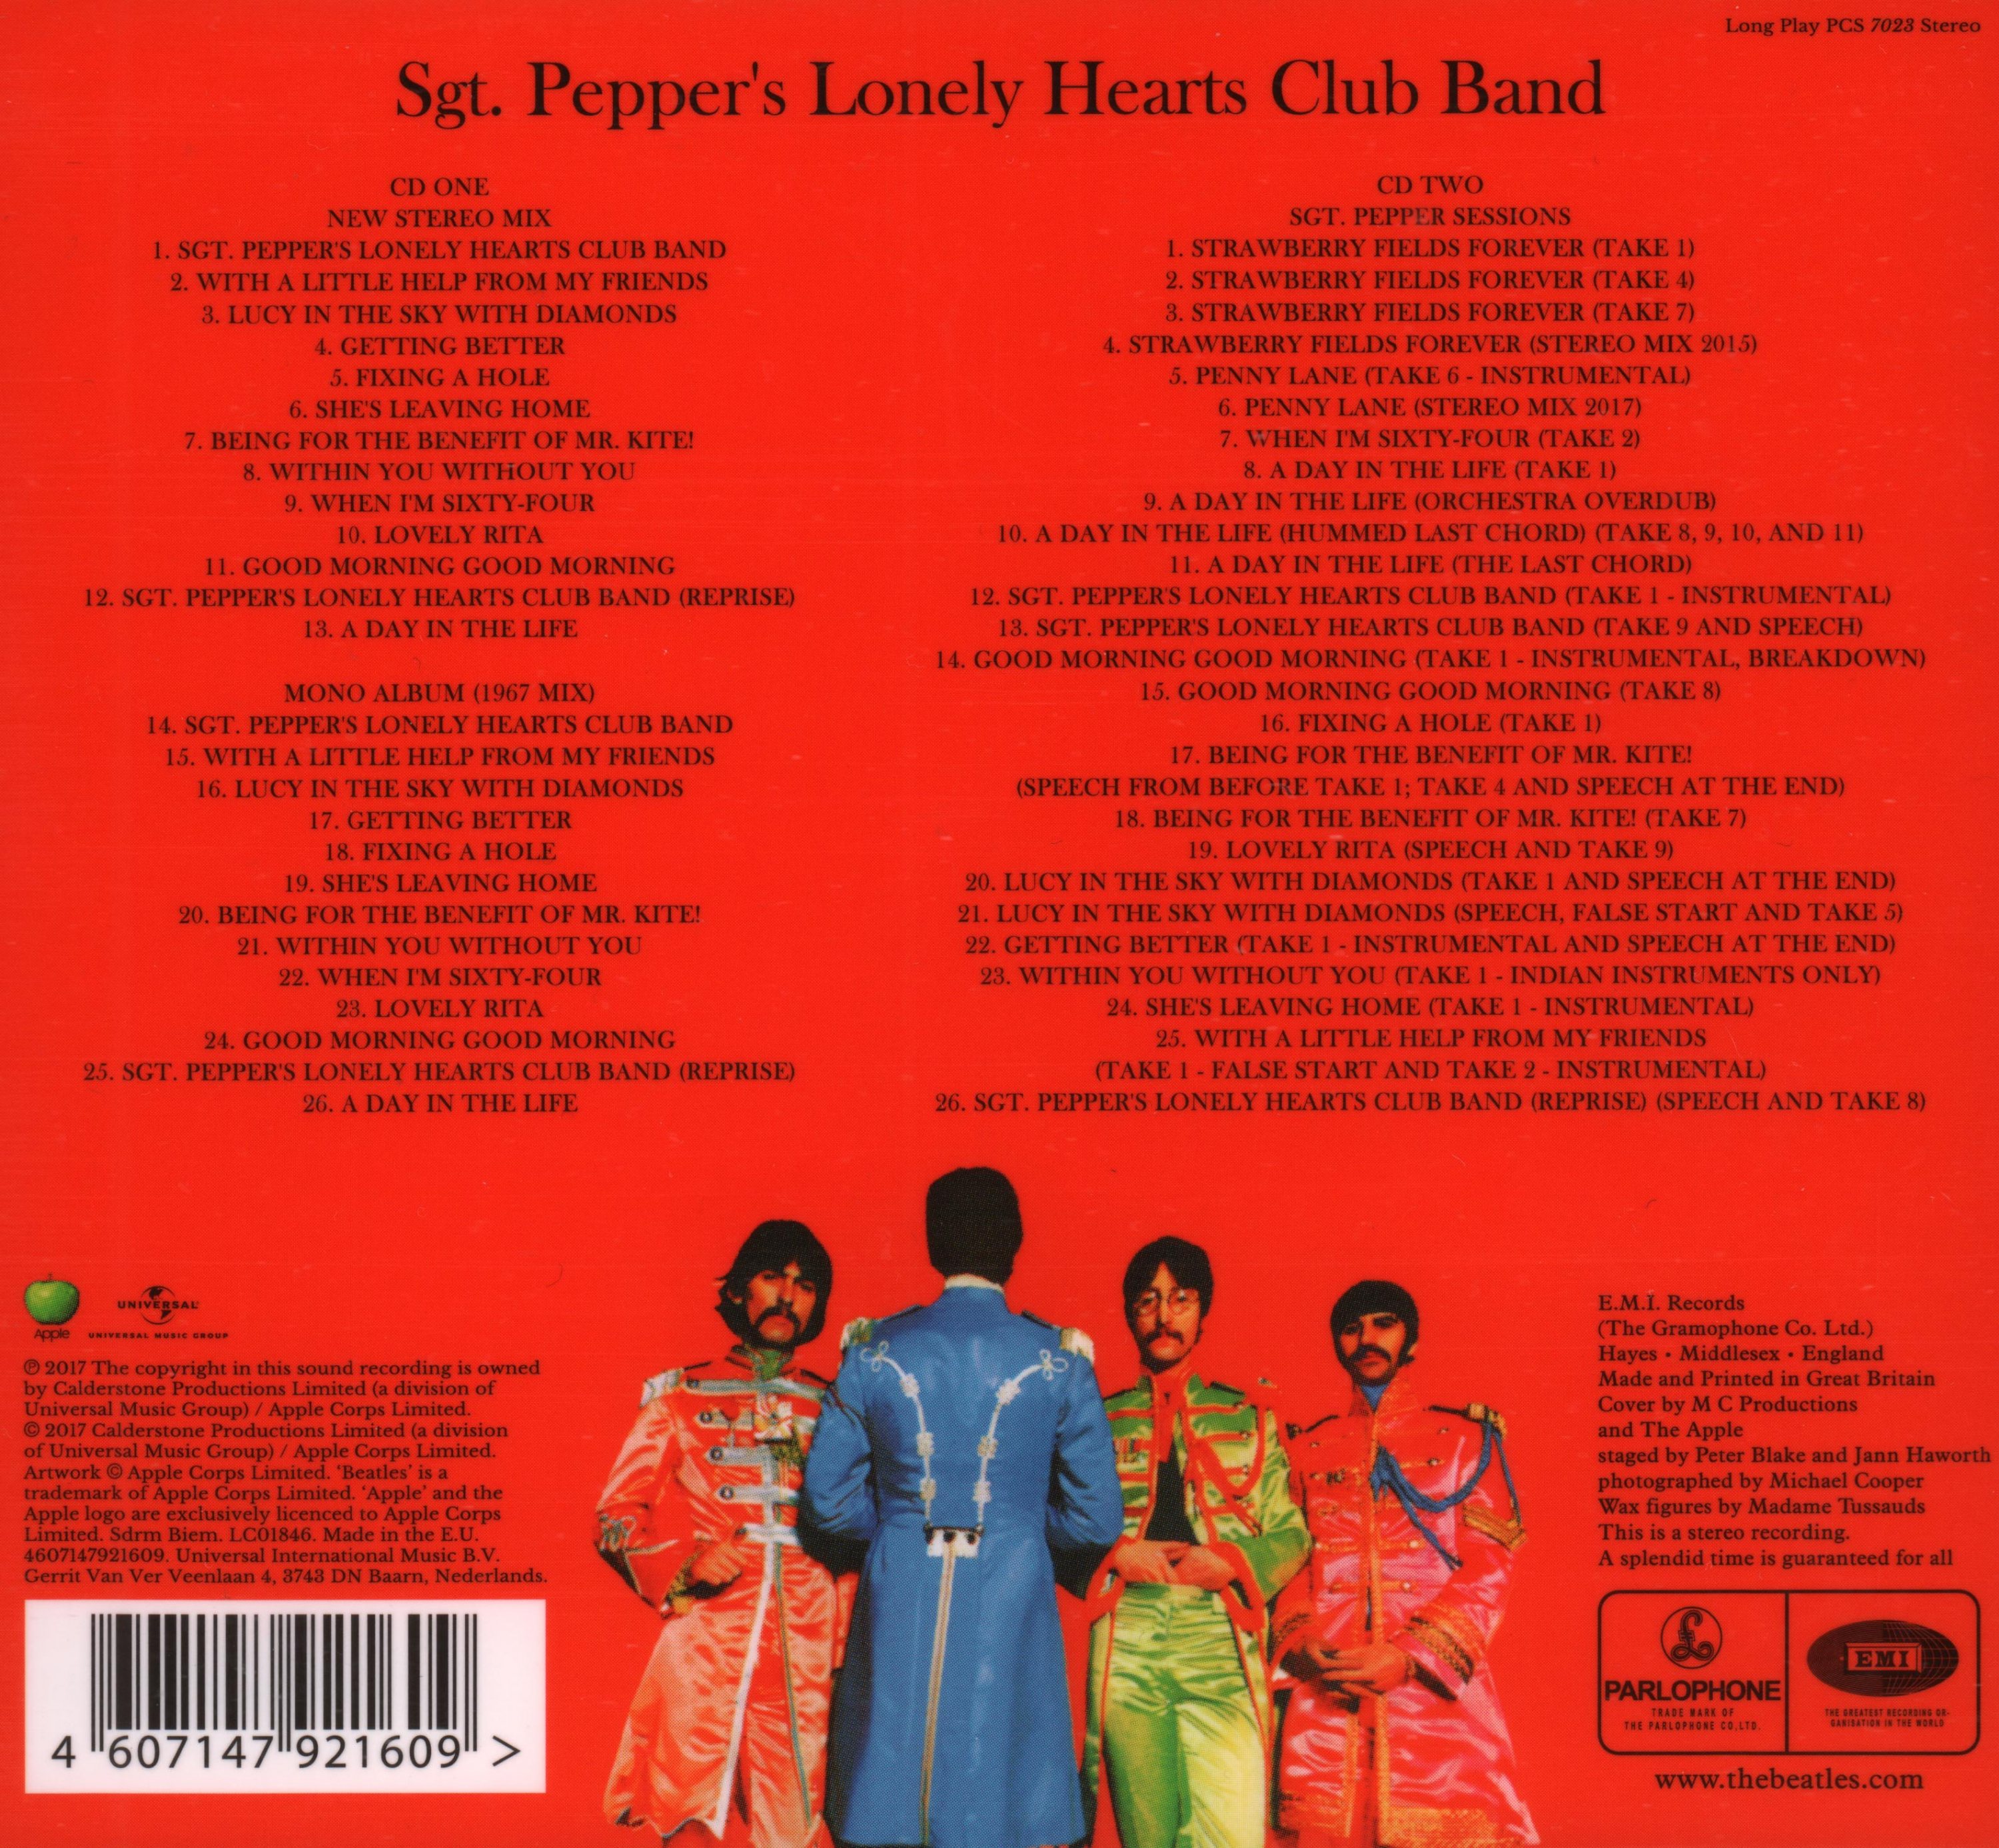 Beatles sgt peppers lonely hearts club. Beatles Sergeant Pepper's Lonely Hearts Club Band. The Beatles Sgt Pepper оркестр 1967. Обложке пластинки Sgt. Pepper's Lonely Hearts Club Band (1967 г.).. Cover Sgt. Pepper`s Lonely Hearts Club Band (1967).